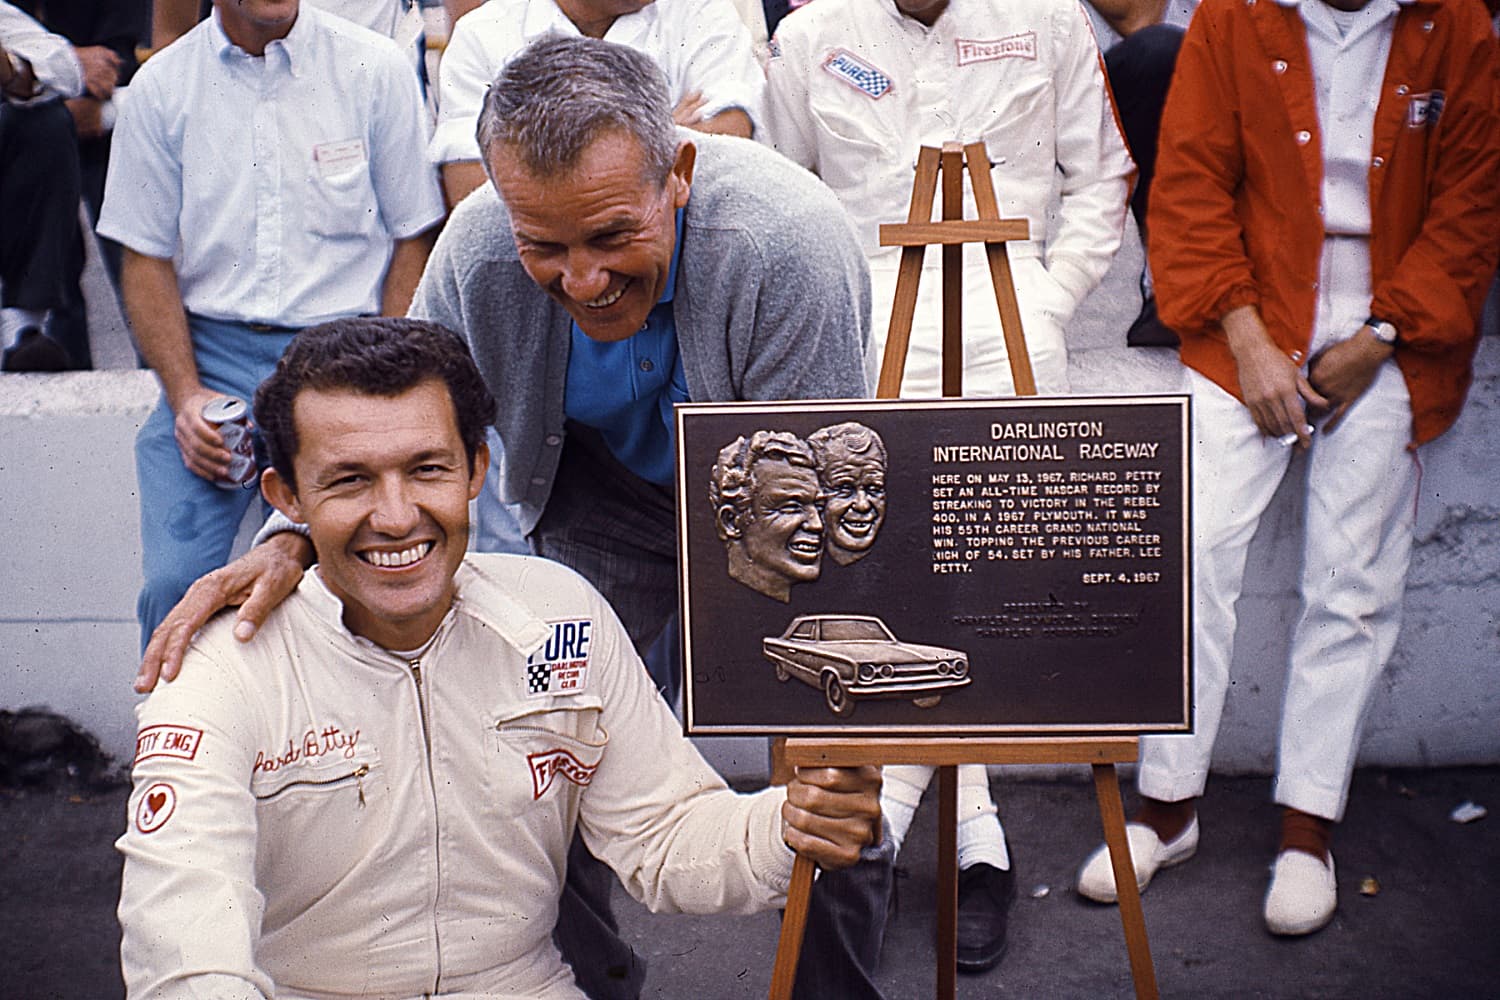 Richard Petty and his father Lee Petty pose with a plaque given to Richard by Darlington Raceway in recognition of his record-setting 55th career win.